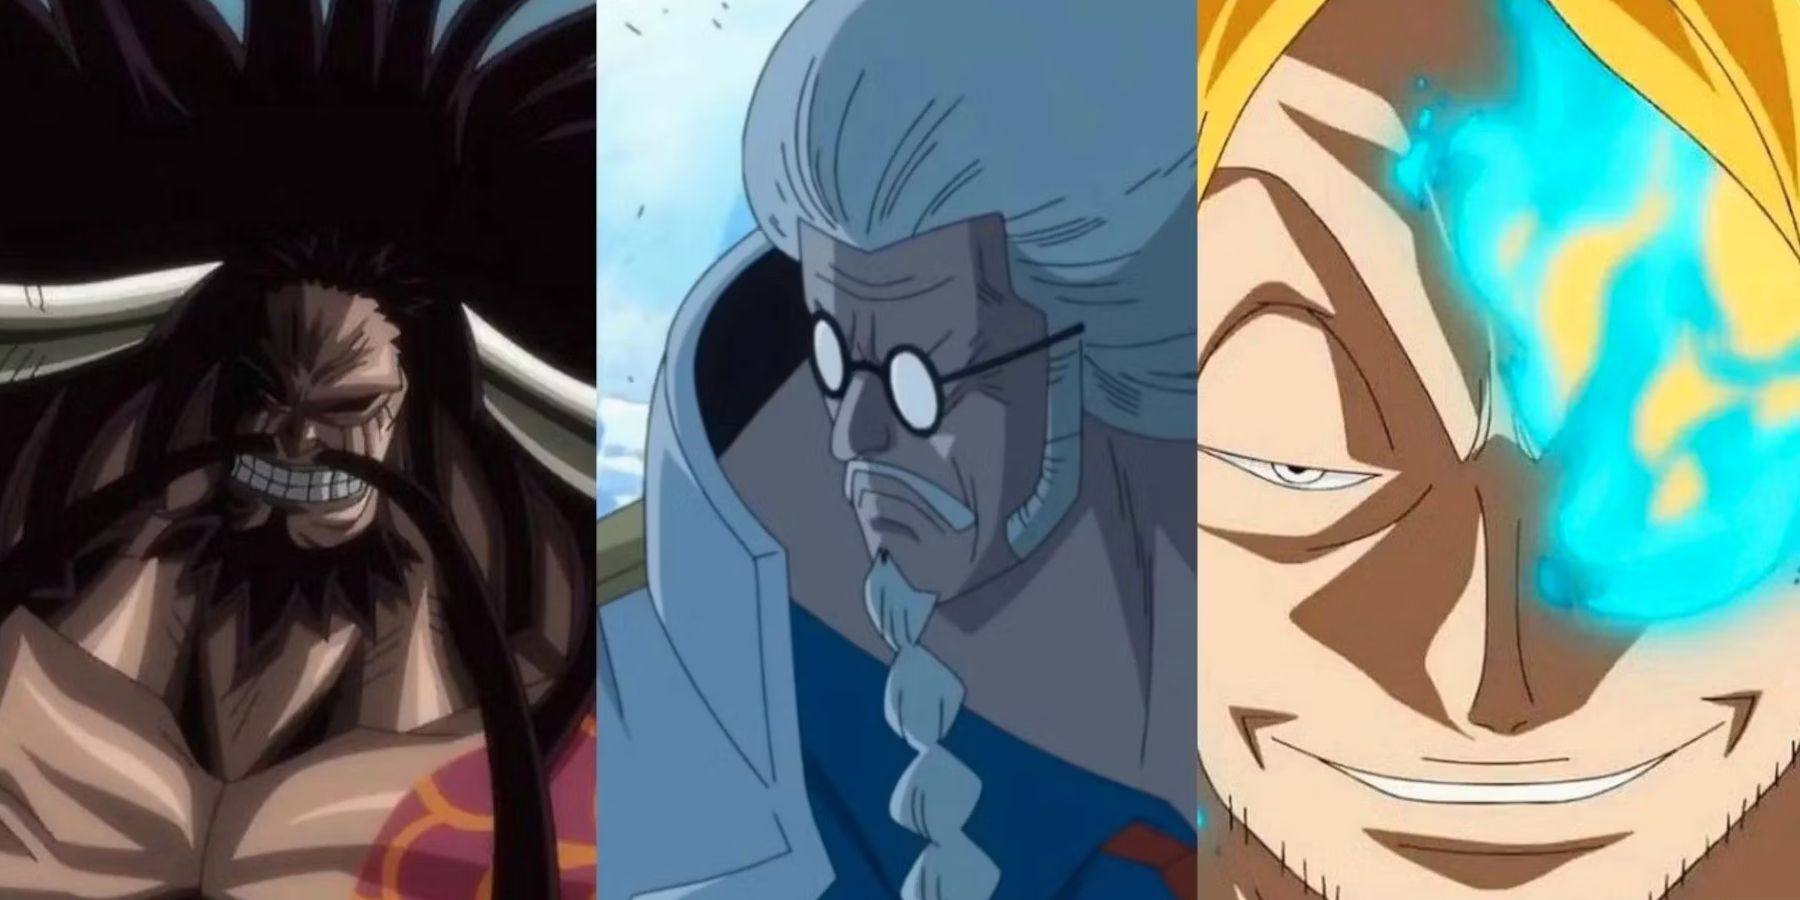 Image shows three seperate images side by side of One Piece characters from the anime: Kaido, Sengoku, and Marco.